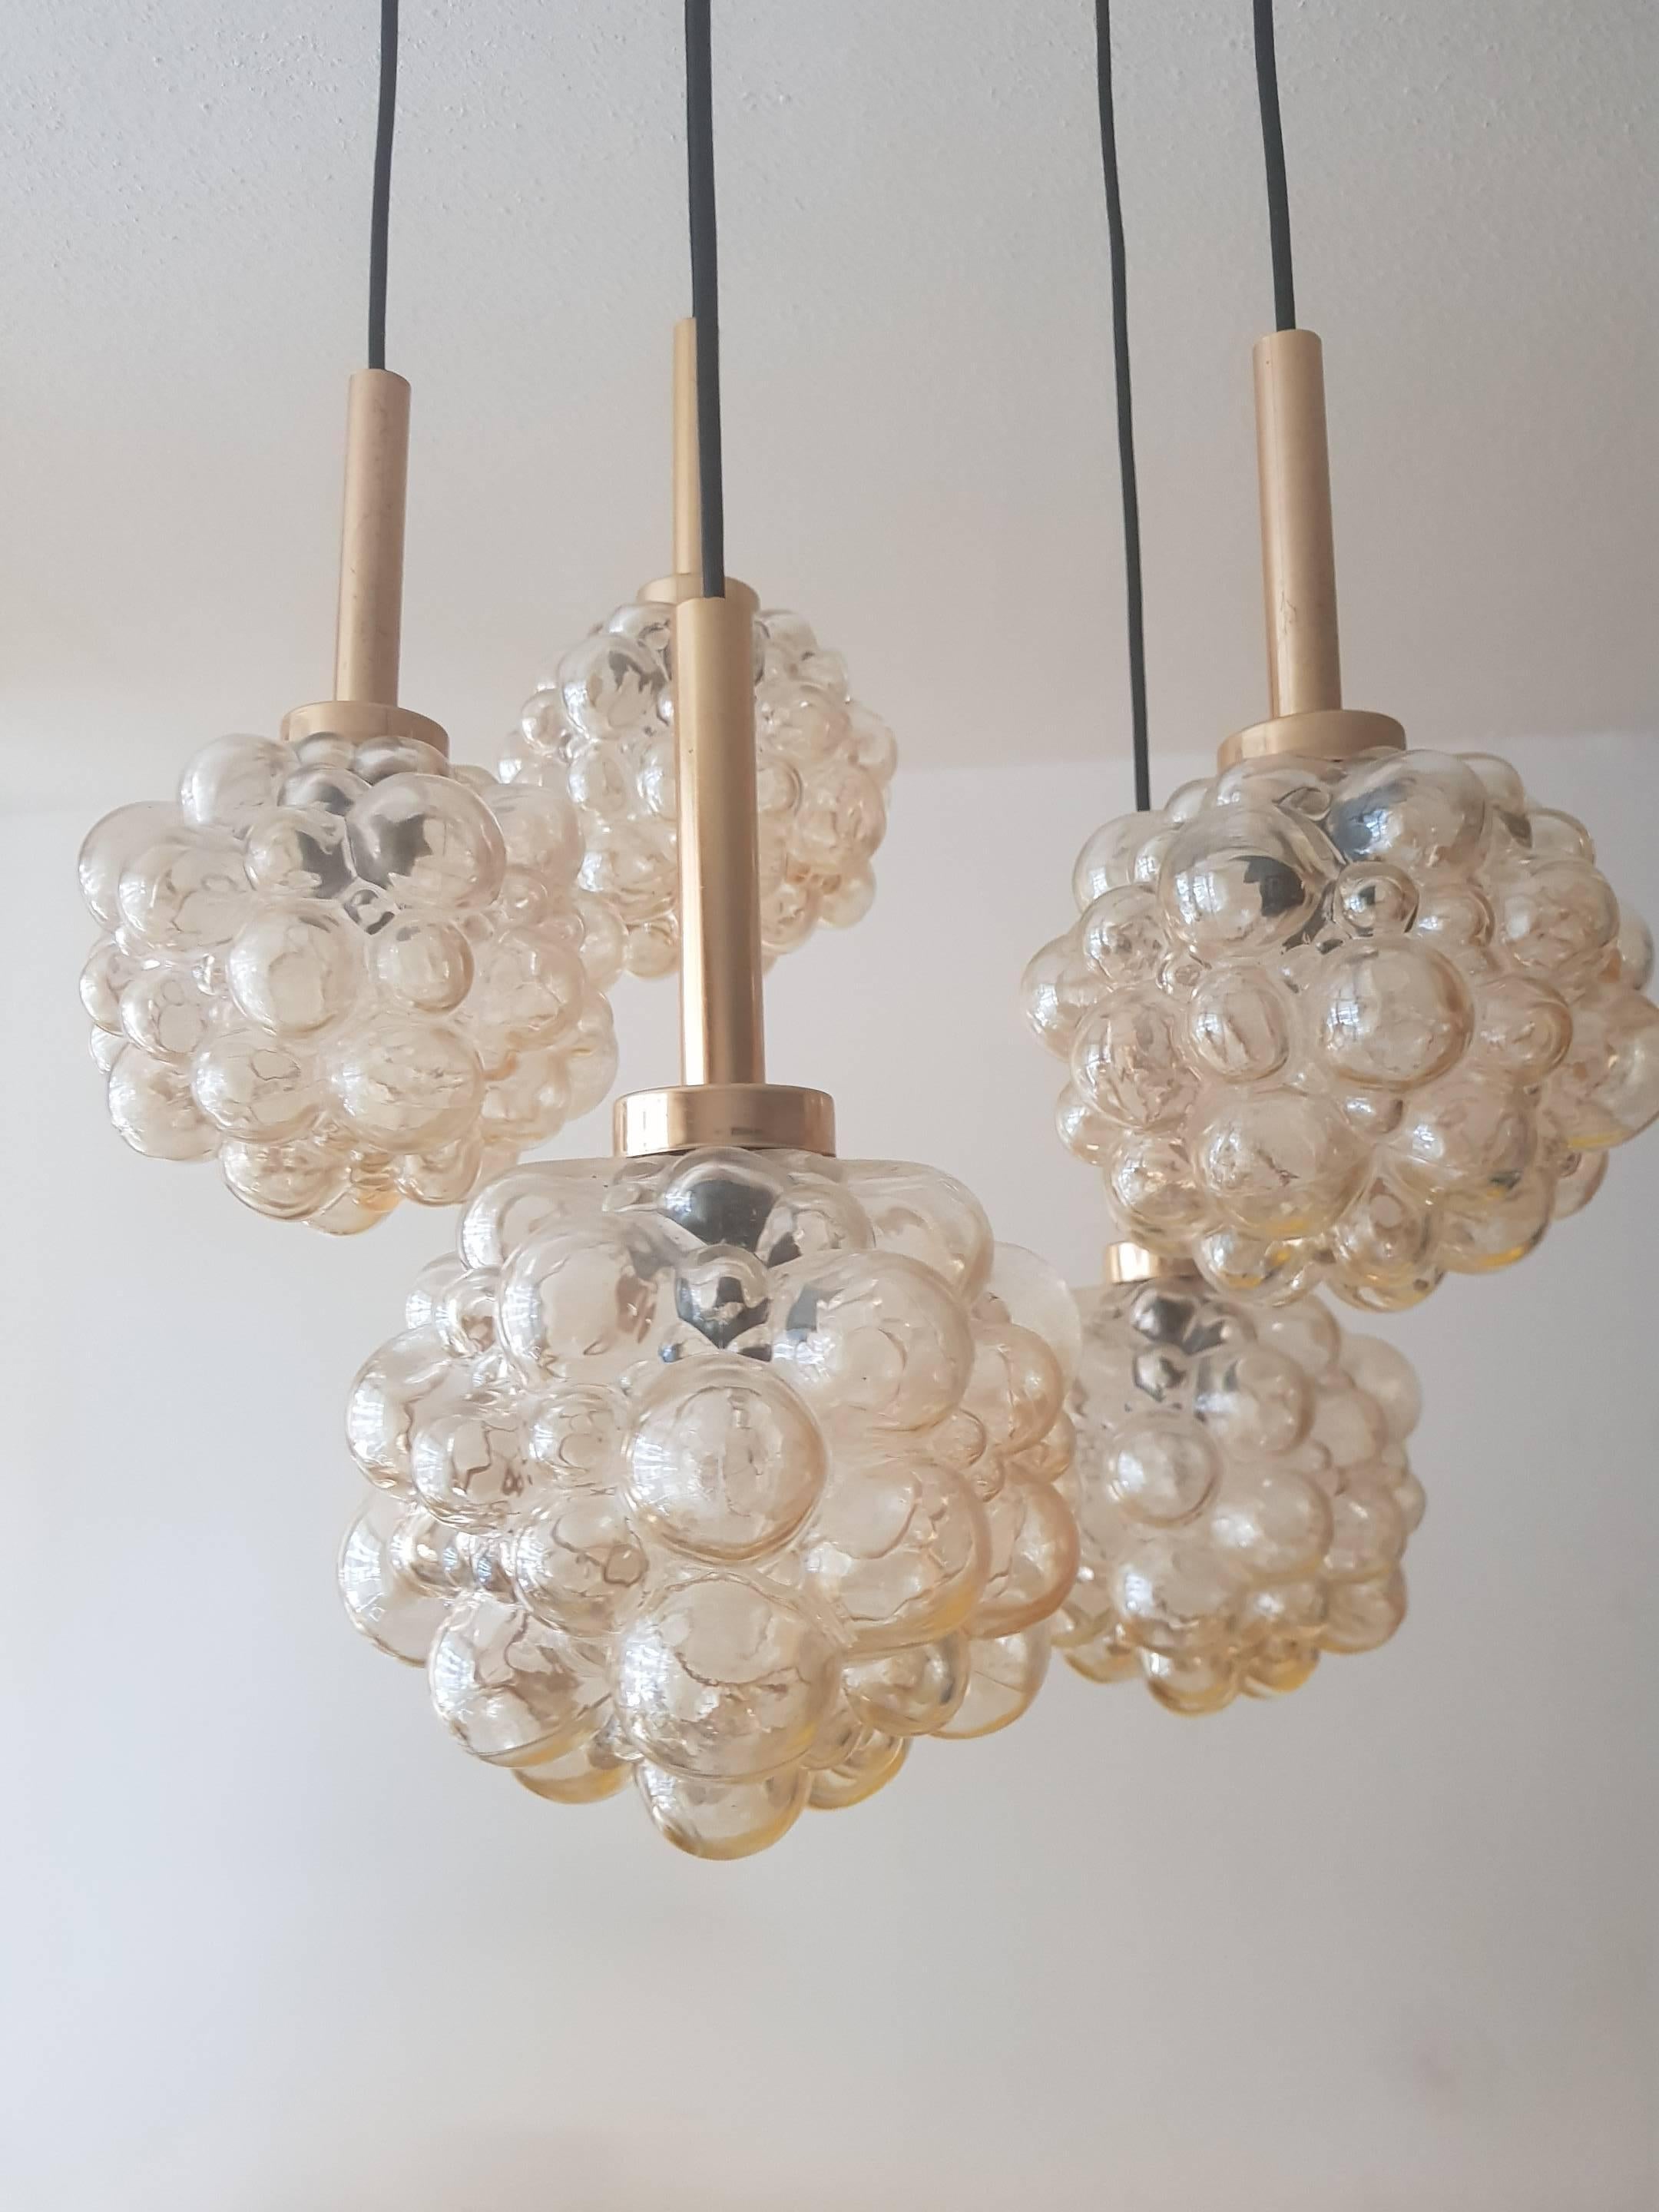 Bubble chandelier by Helena Tynell a designer from Finland. This design is from the 1960s. The chandelier has 5 lights with glass shade of iridescent, amber-colored bubble glass, hangs on an elegant brass linkage
Length of wire can be